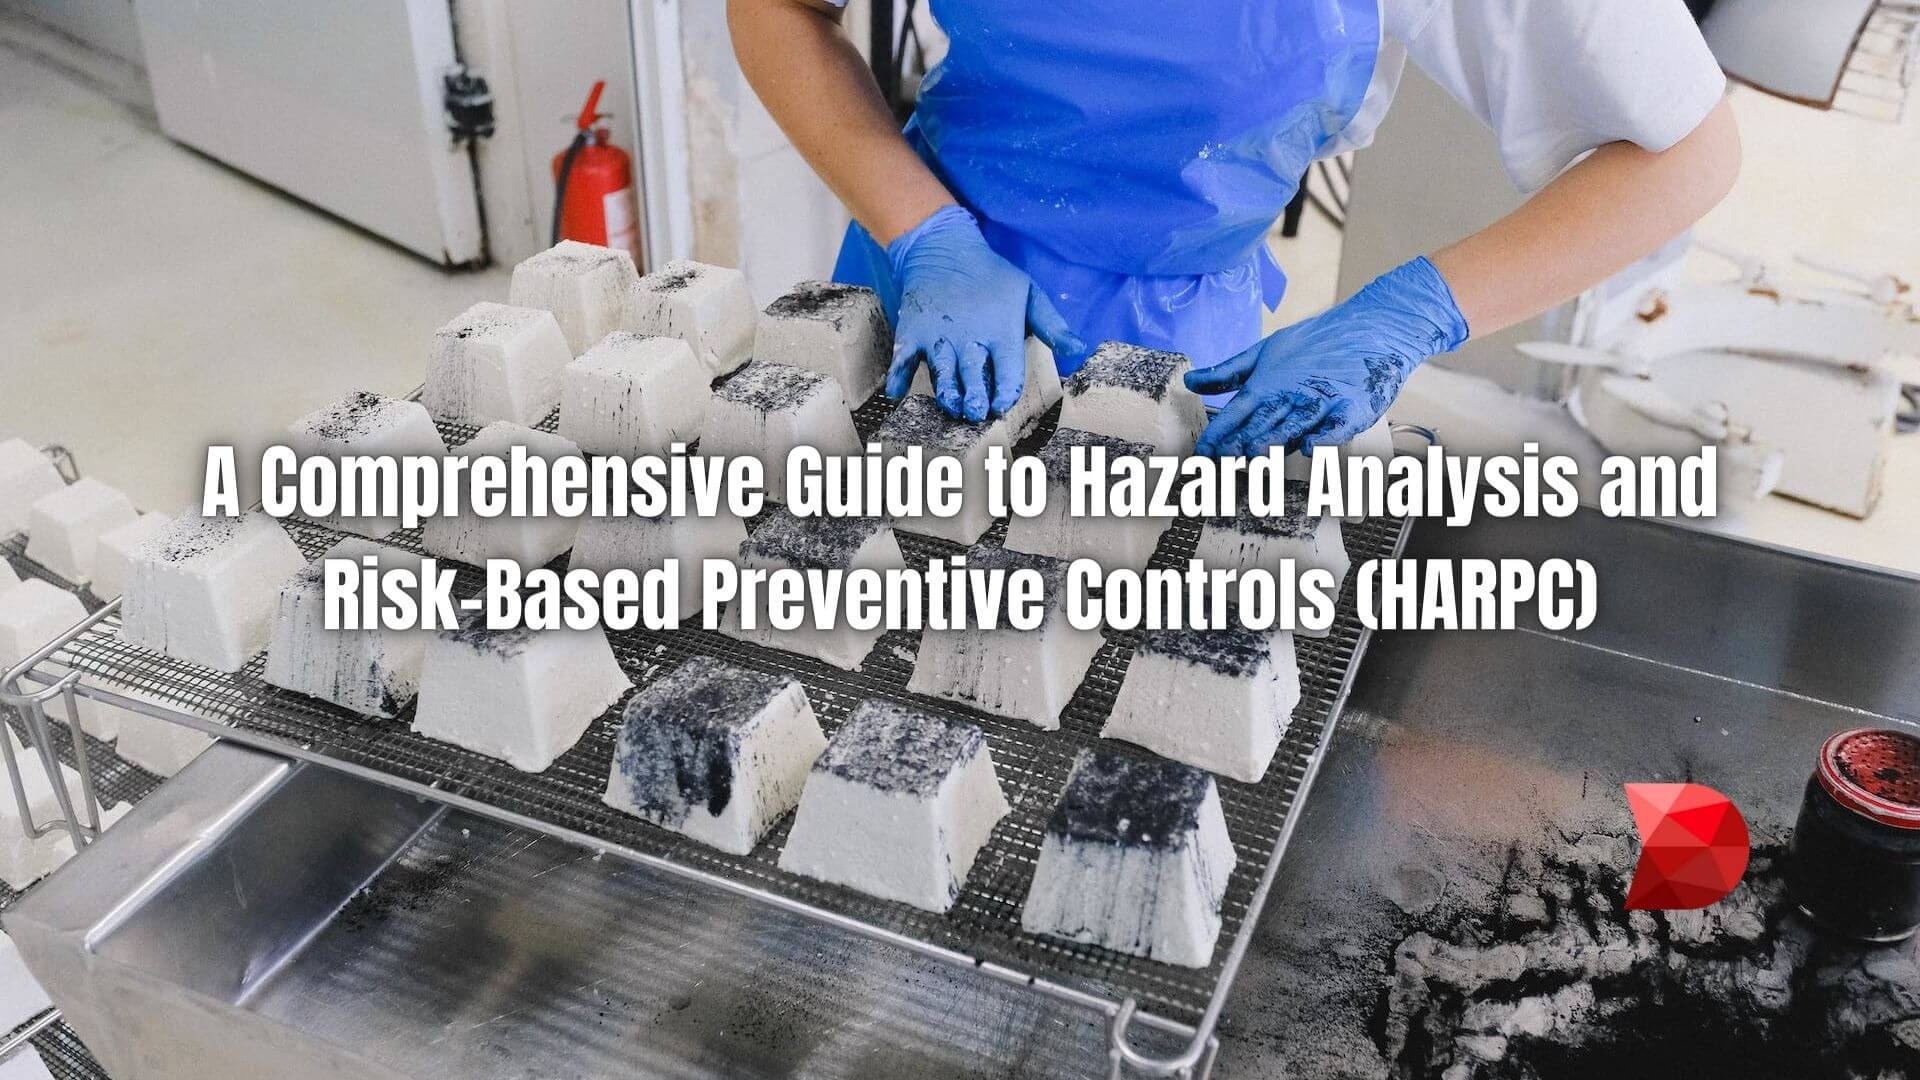 The HARPC framework is a proactive, systematic approach to ensuring food safety. Here's an in-depth understanding of HARPC.